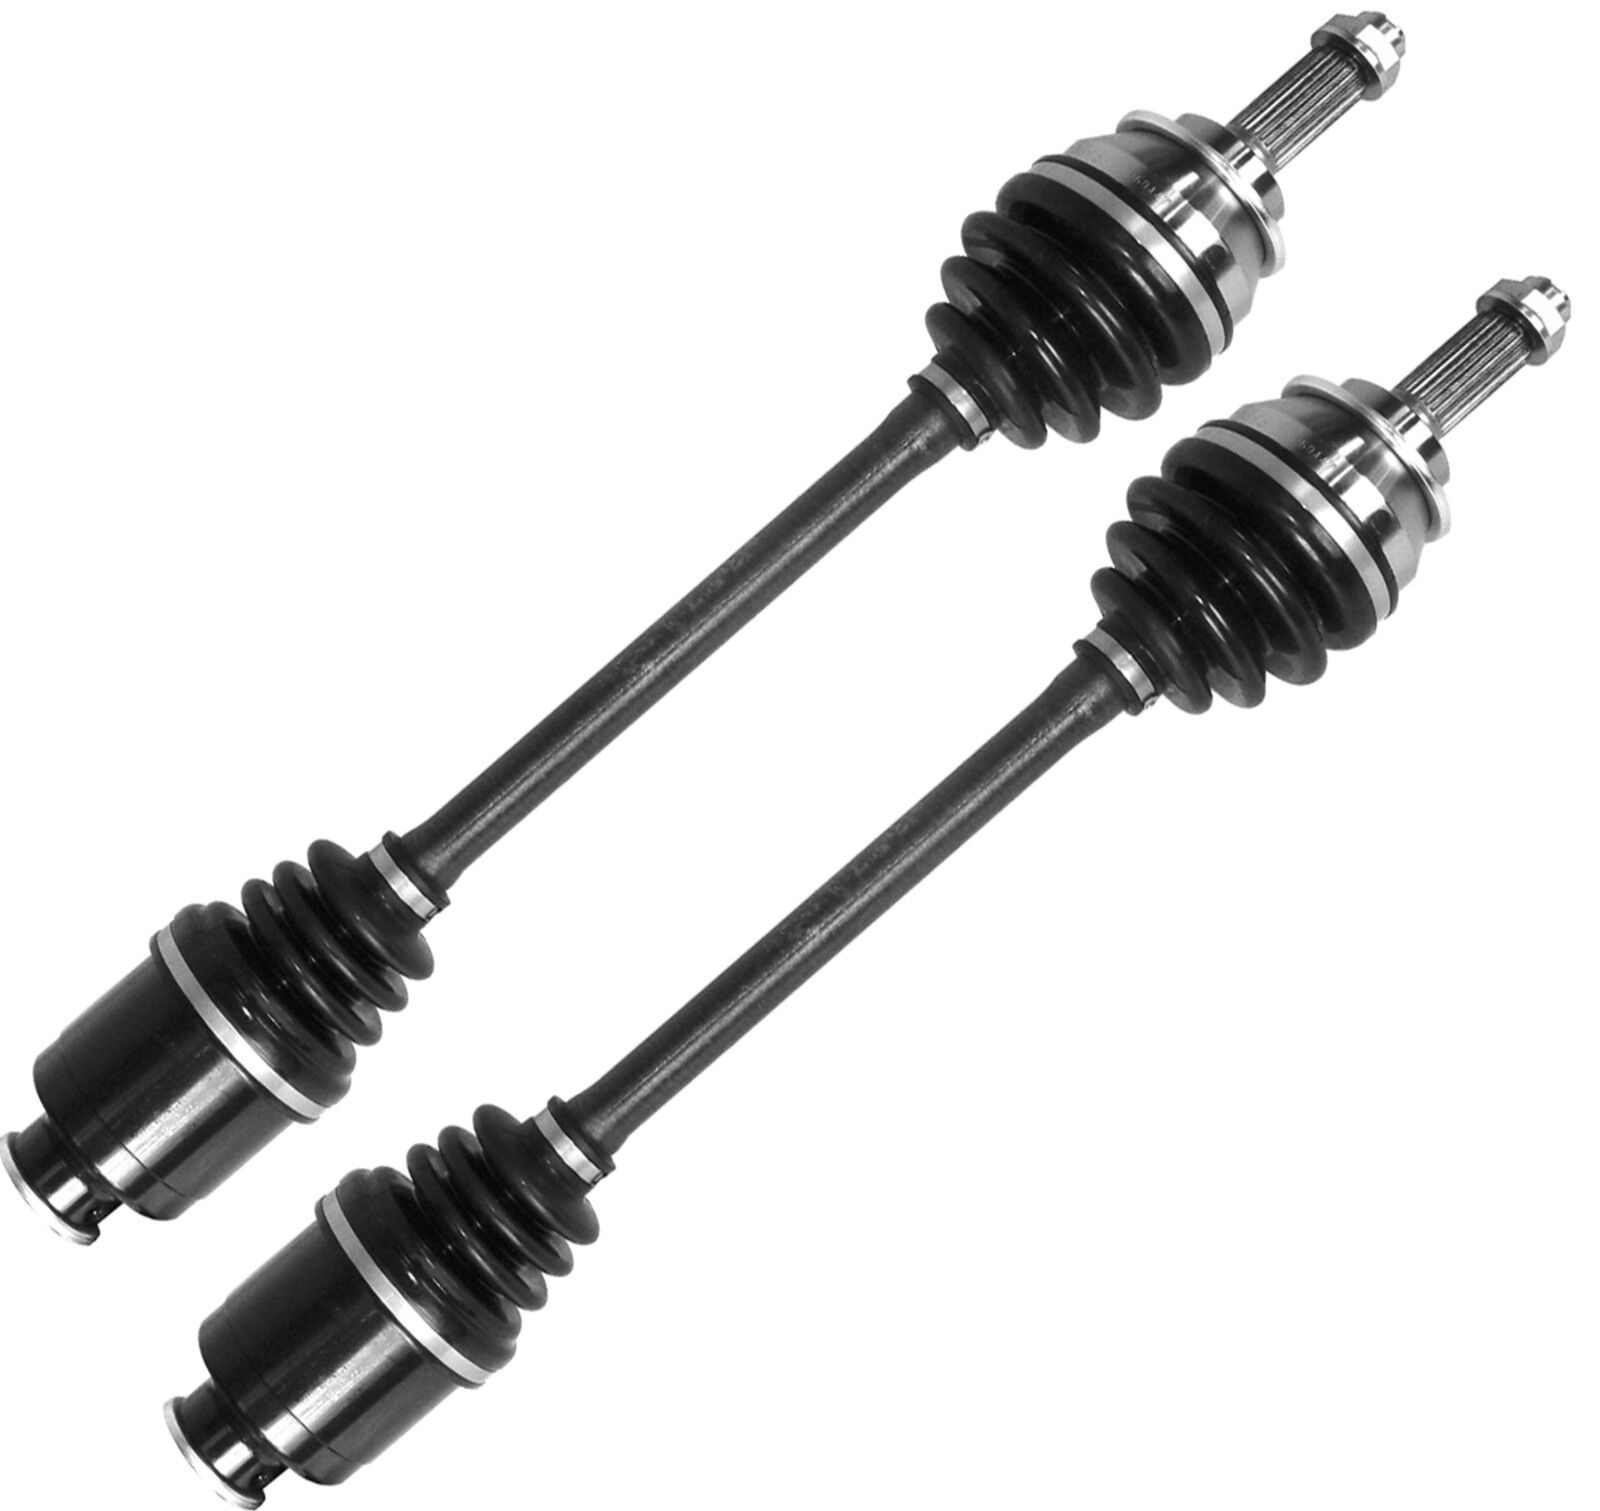 2 New CV Axles Front Pair Fit Subaru Impreza Legacy Forester 